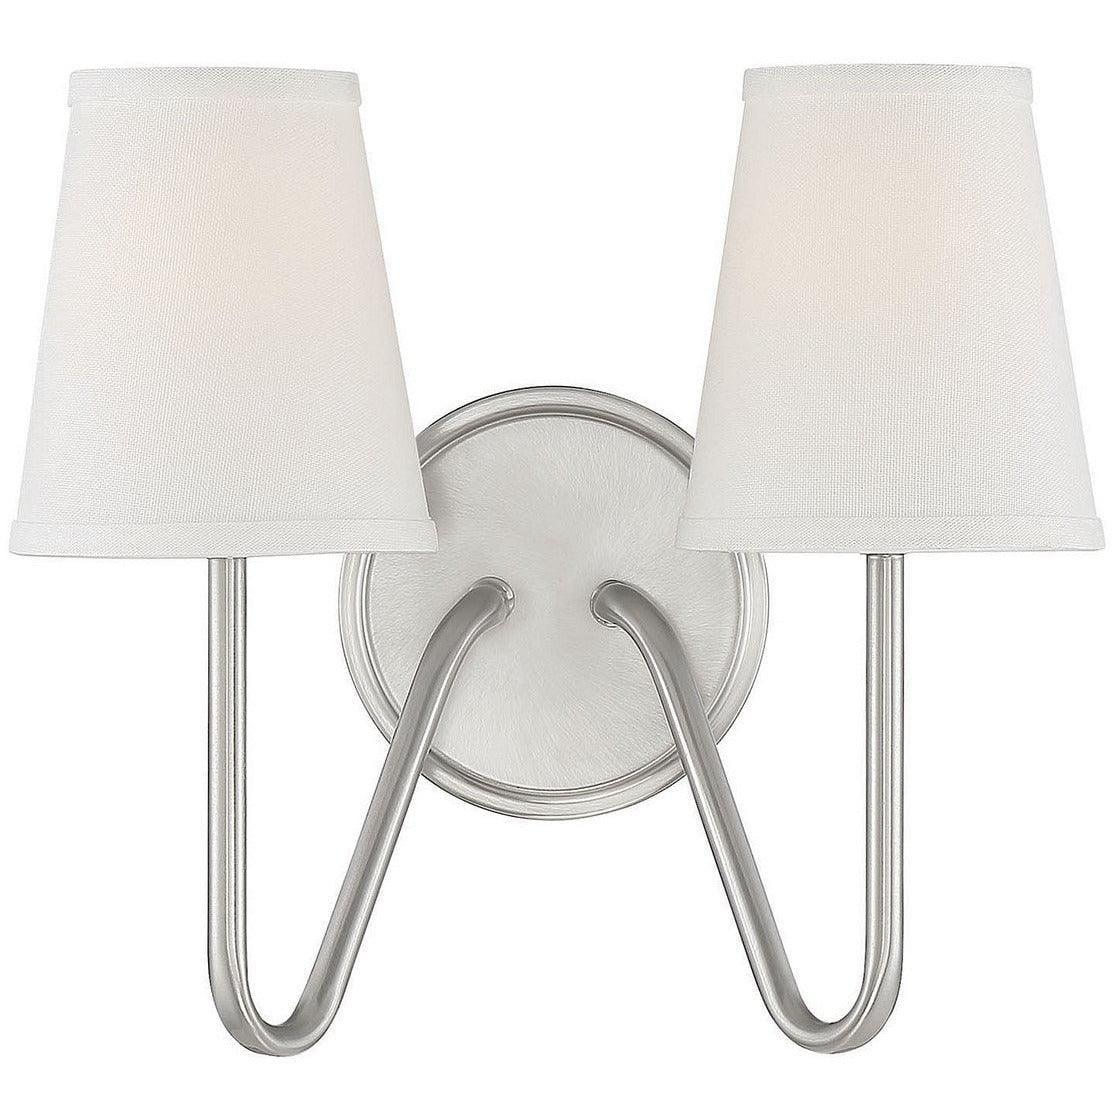 Meridian Lite Trends - Meridian Two Light Wall Sconce - M90055BN | Montreal Lighting & Hardware